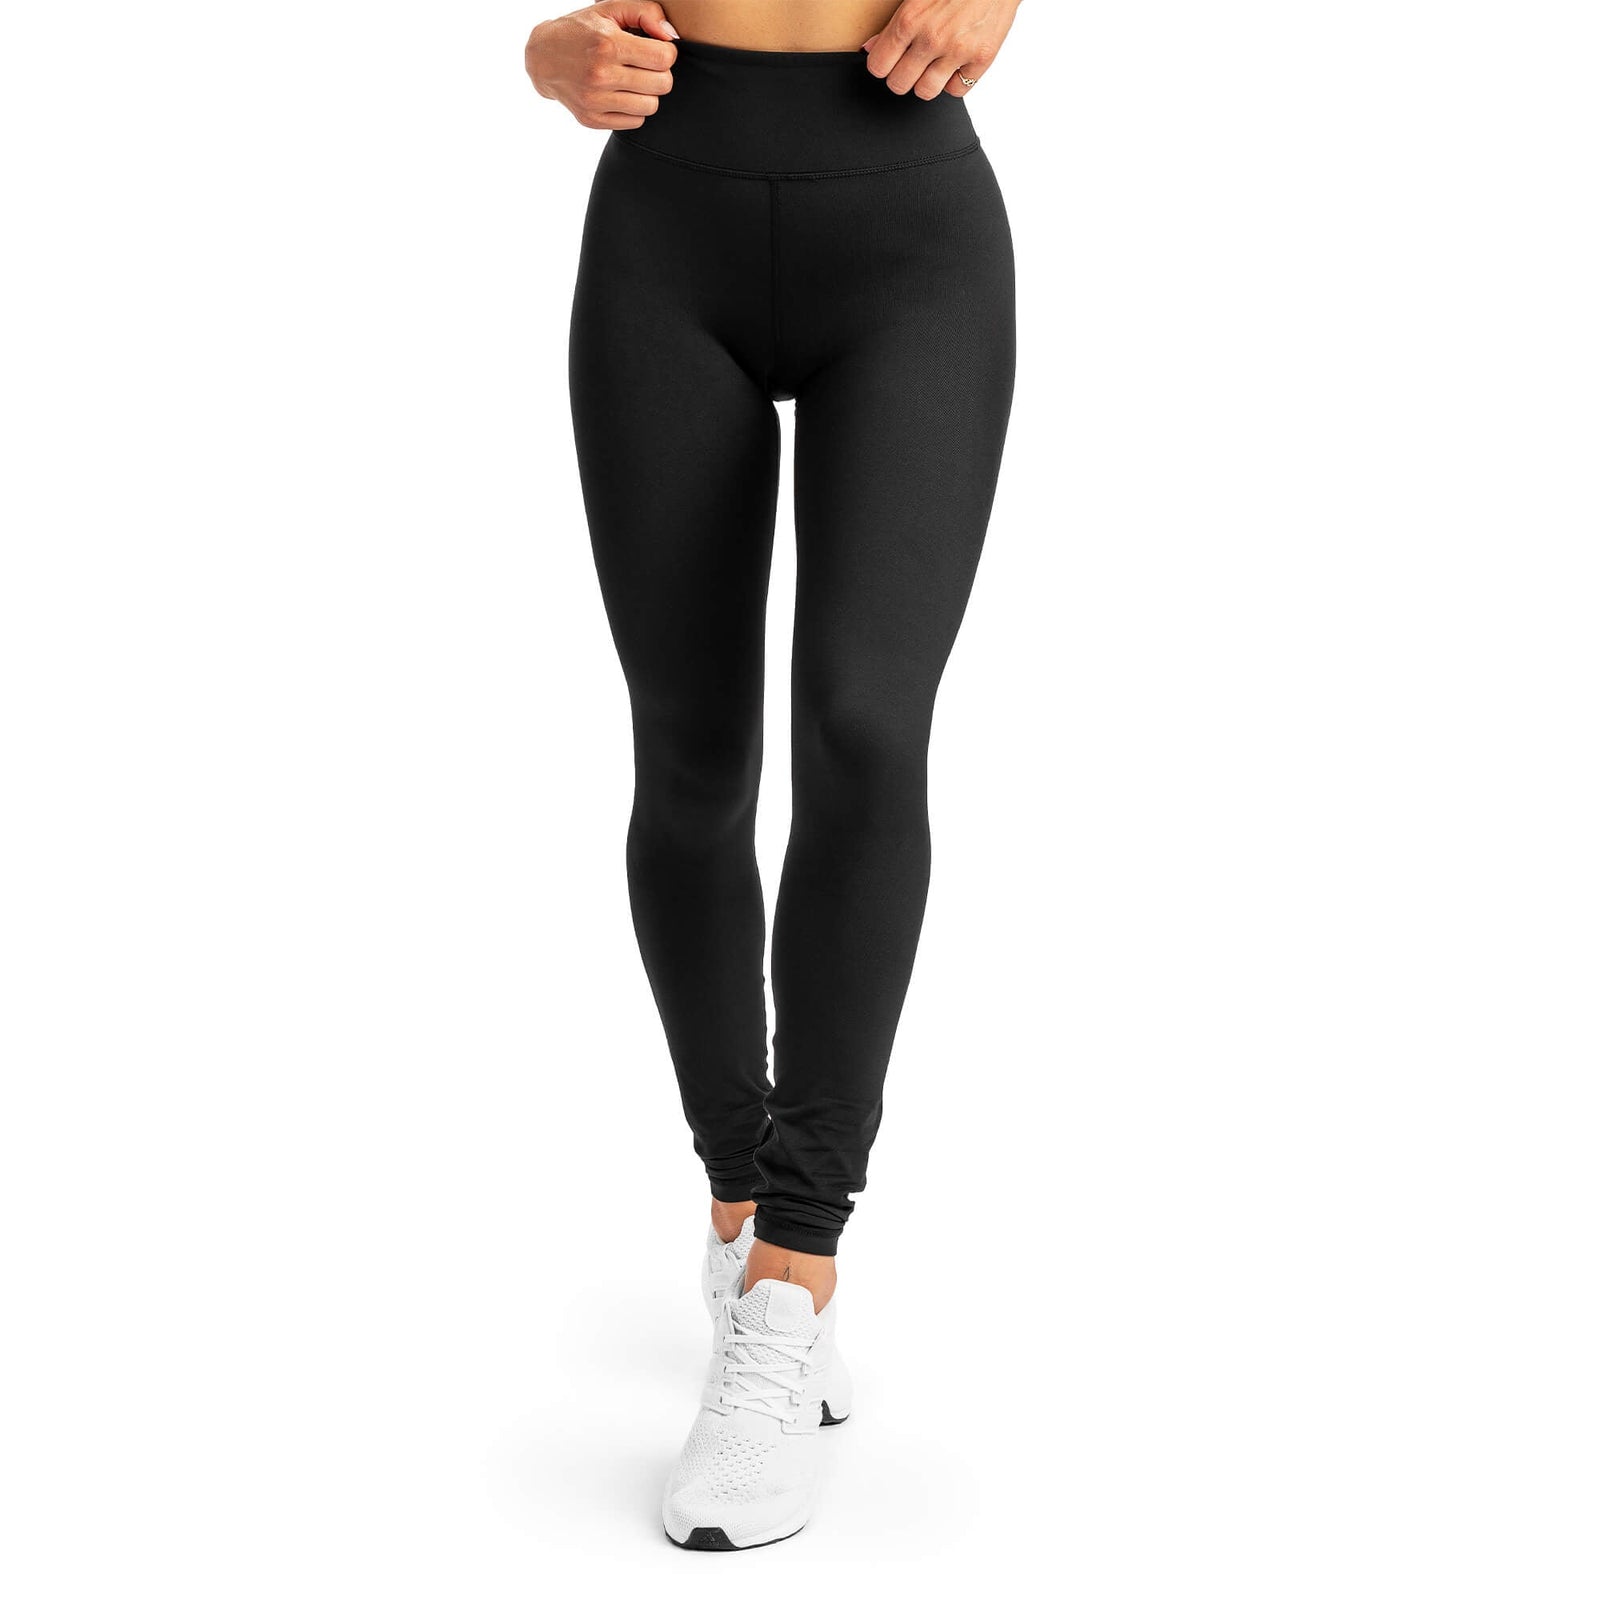 Clothing & Shoes - Bottoms - Leggings - Yummie® Poppy Active 7/8 Legging -  Online Shopping for Canadians